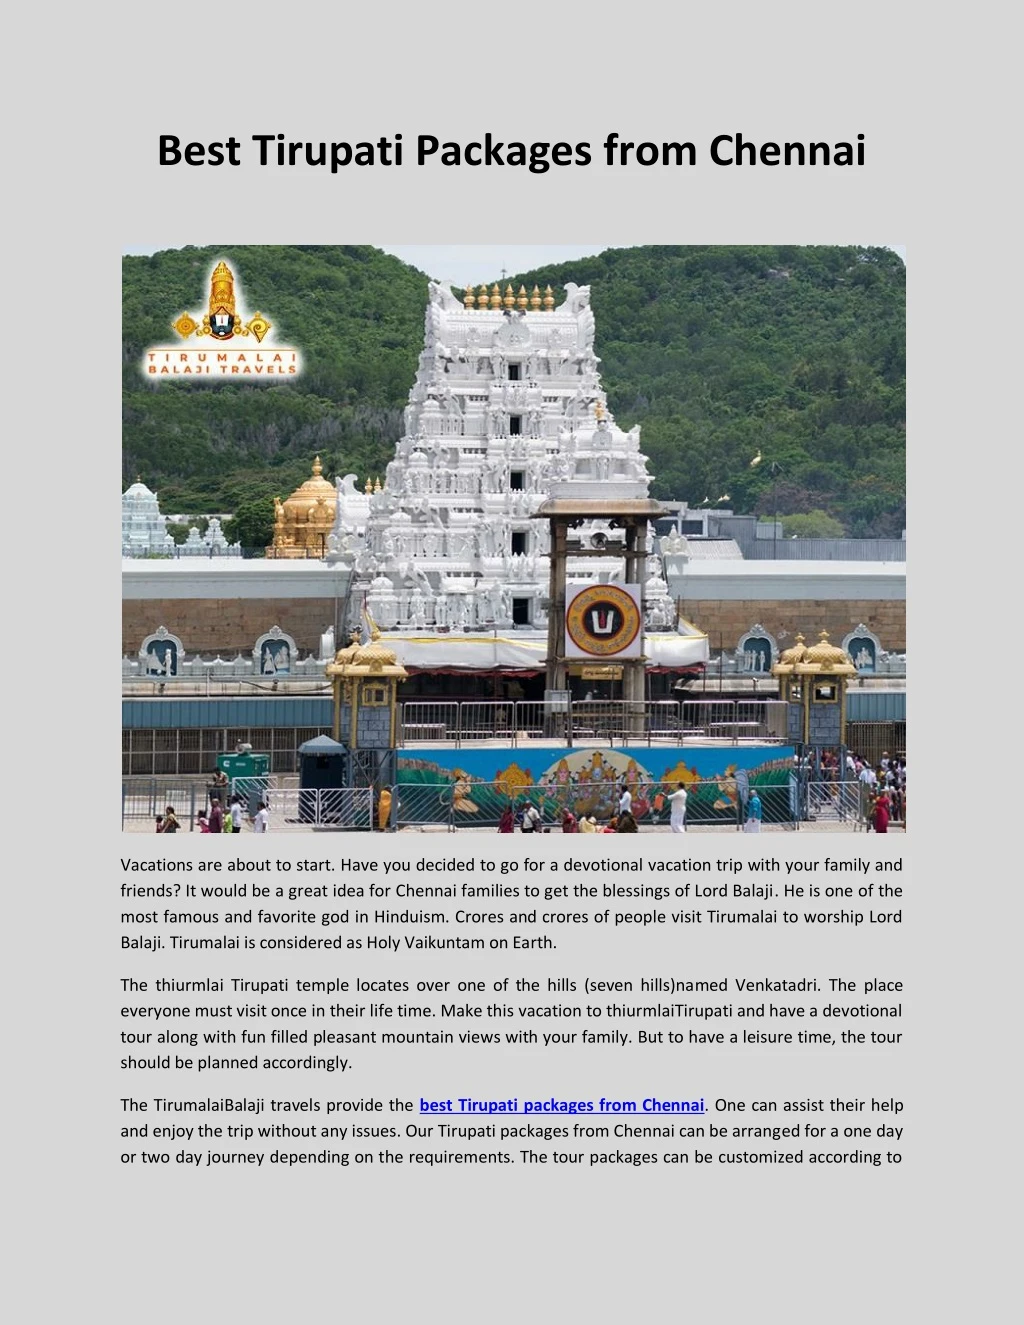 best tirupati packages from chennai